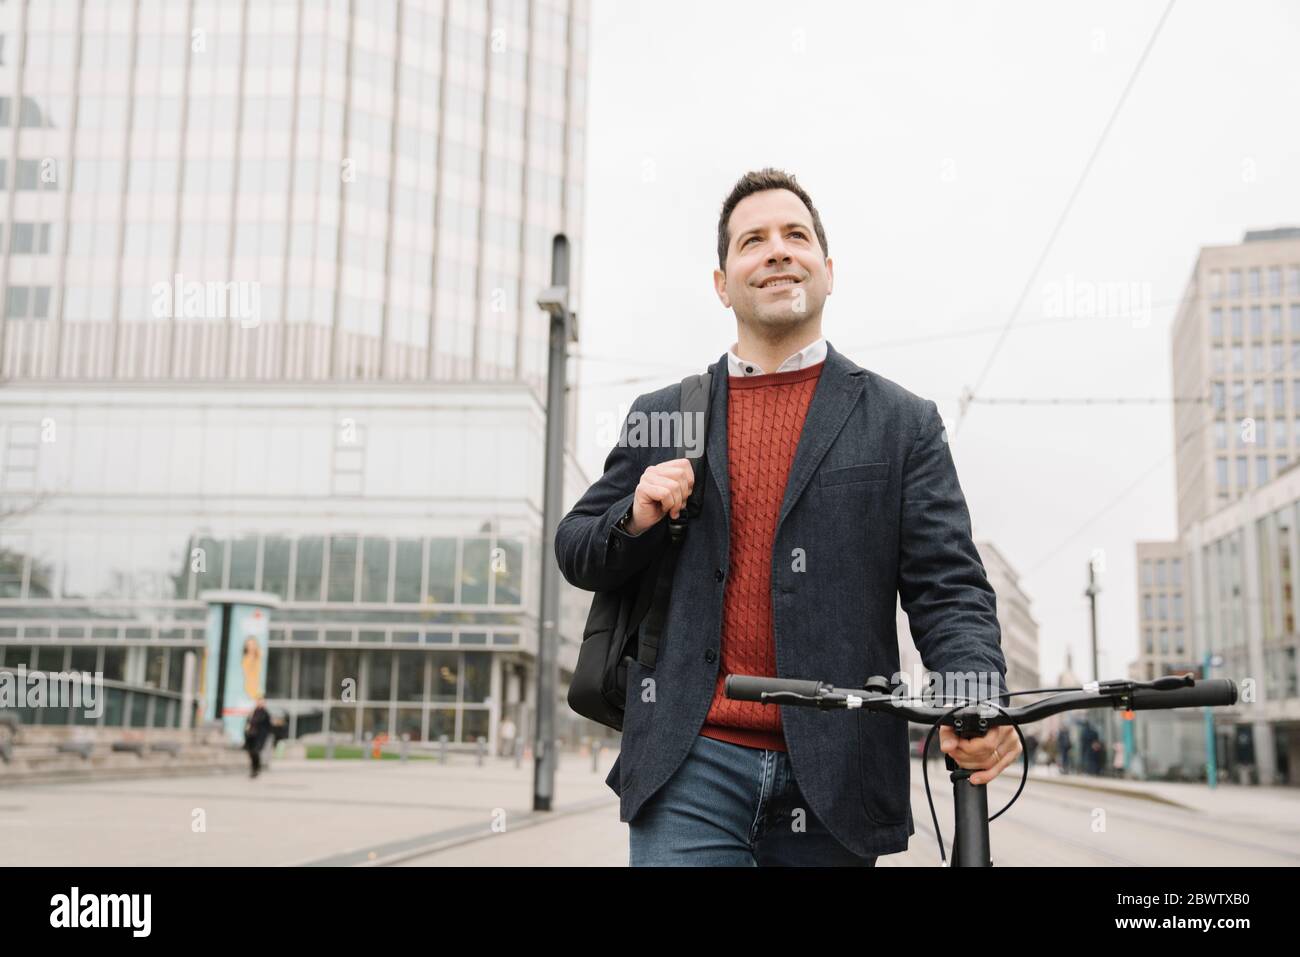 Smiling businessman looking away while walking with bicycle on city street in Frankfurt, Germany Stock Photo